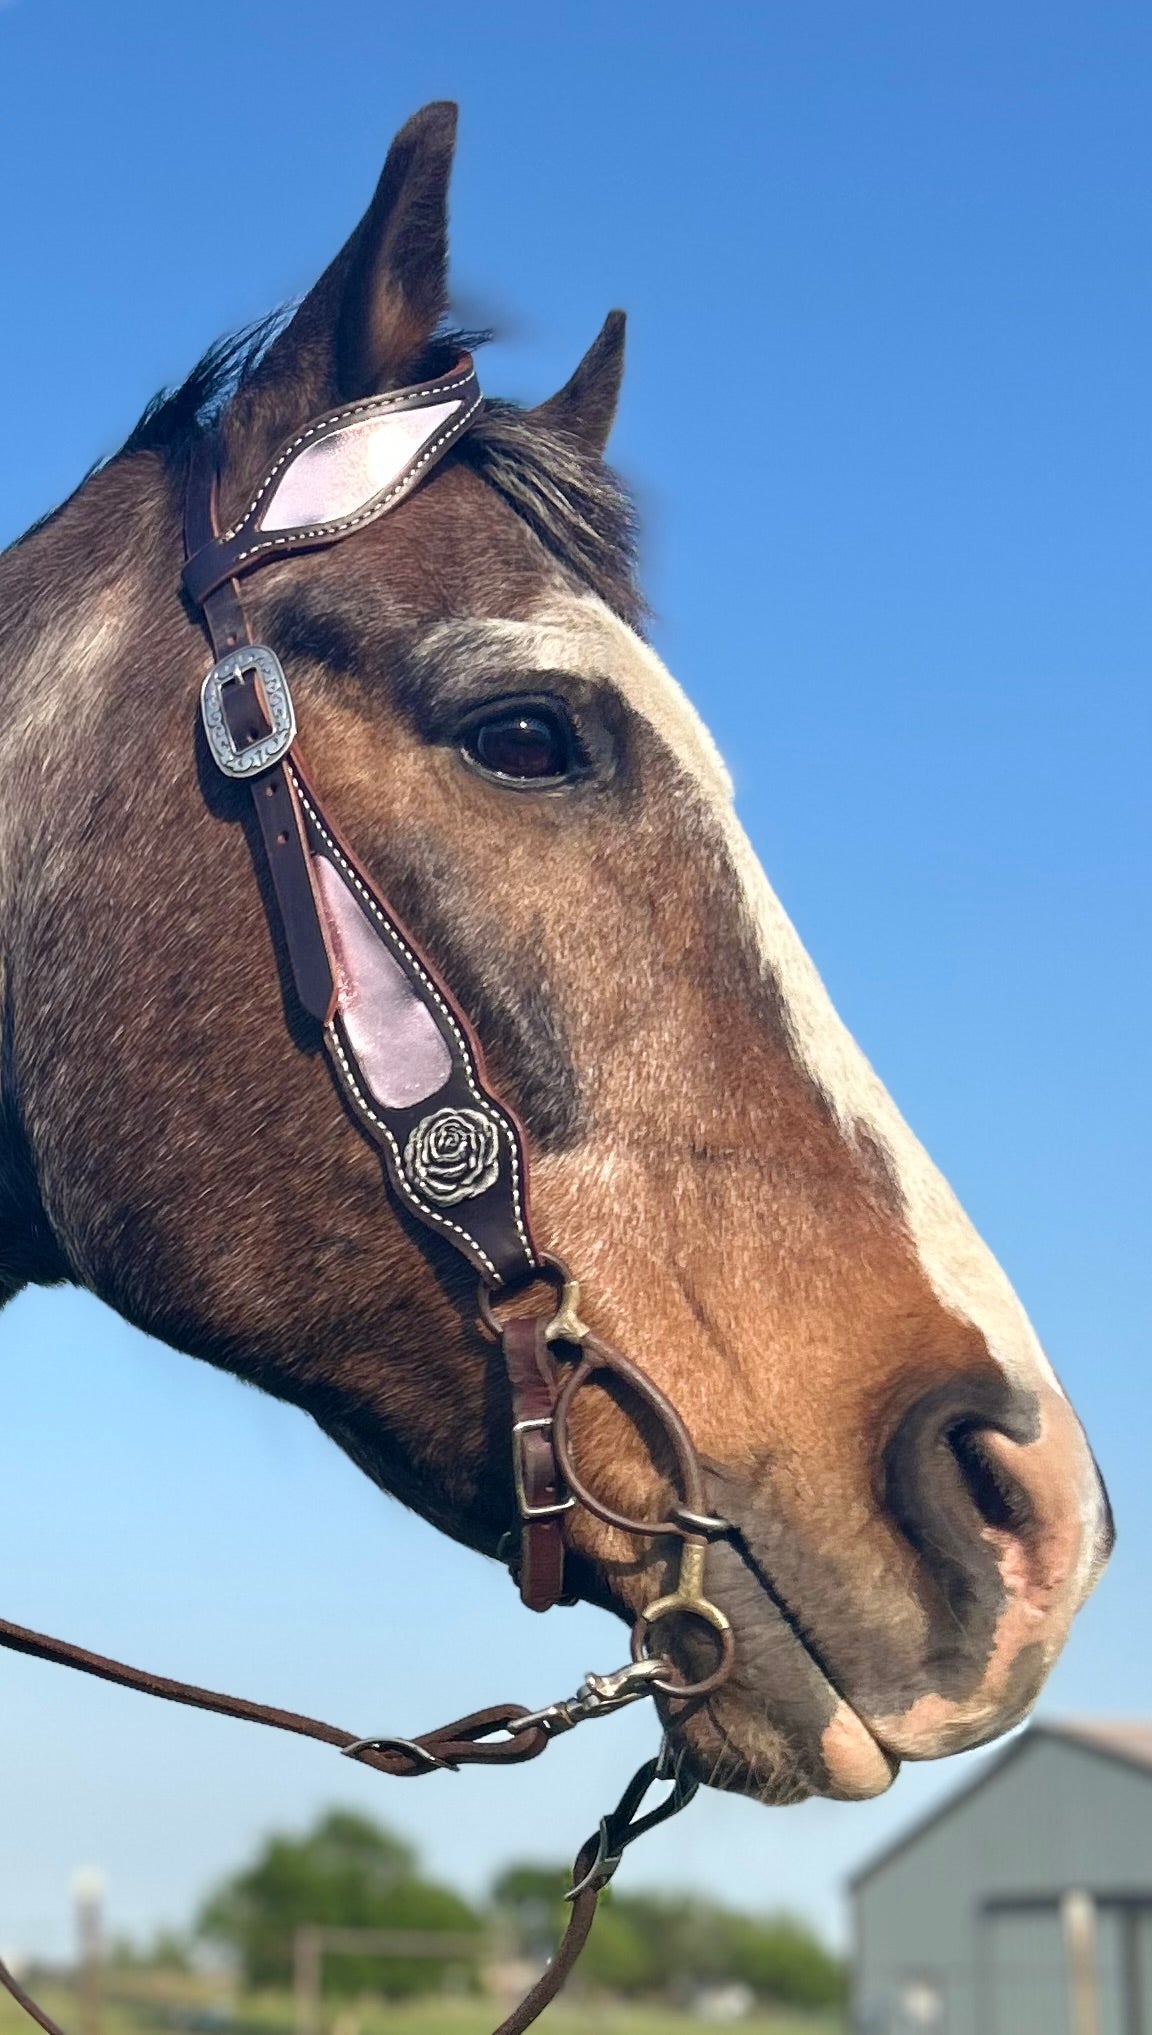 SmarTack Gen 1 - Complete Set Inlays (Breast Collar, Wither Strap, Brow Band and One Ear Headstall)